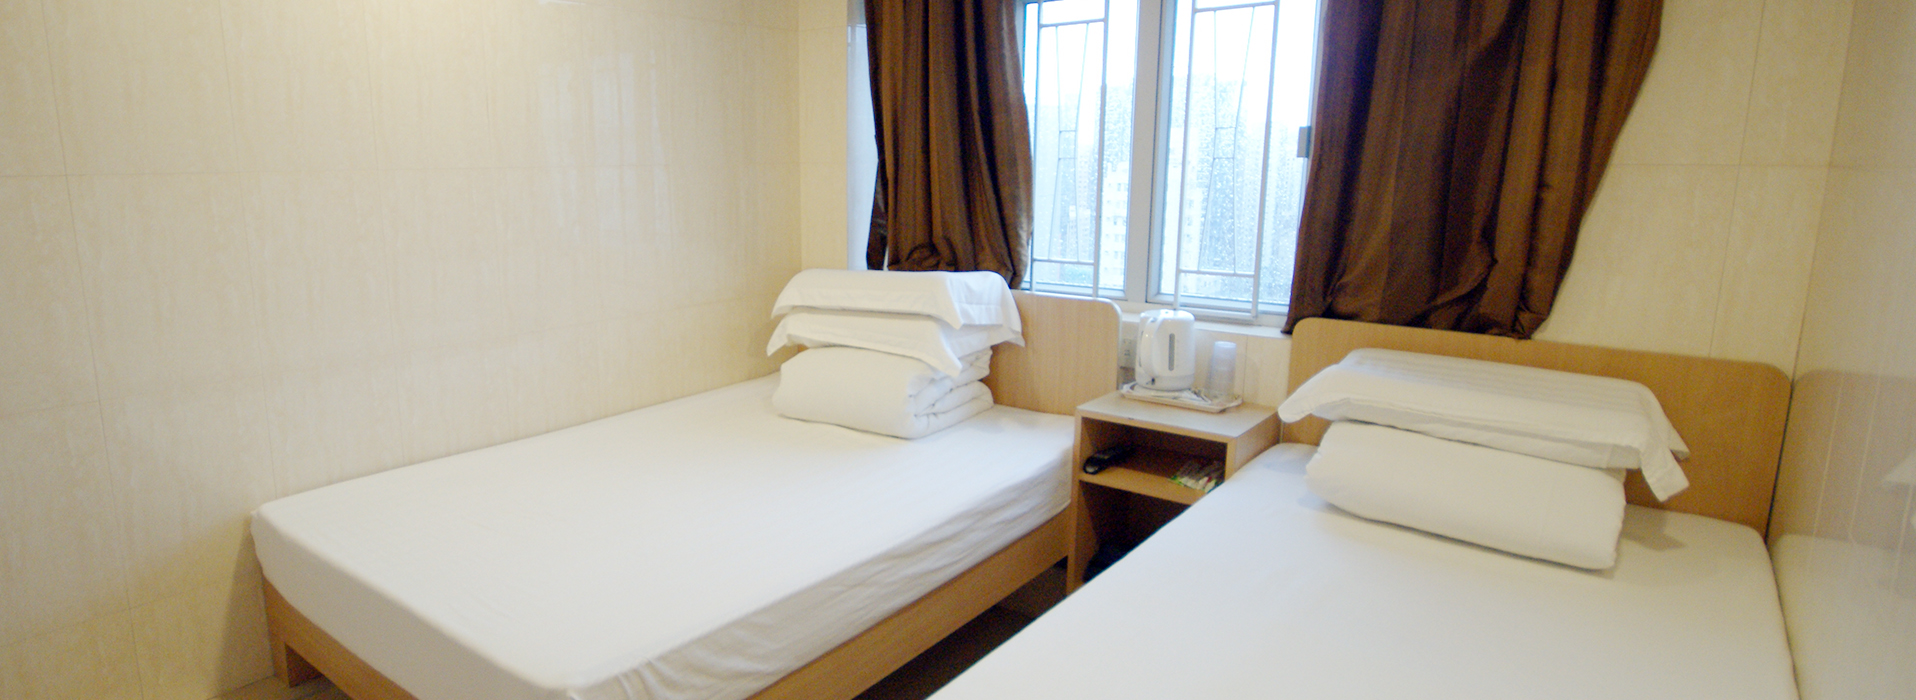 Hei Hung Hotel Deluxe Ensuite Room